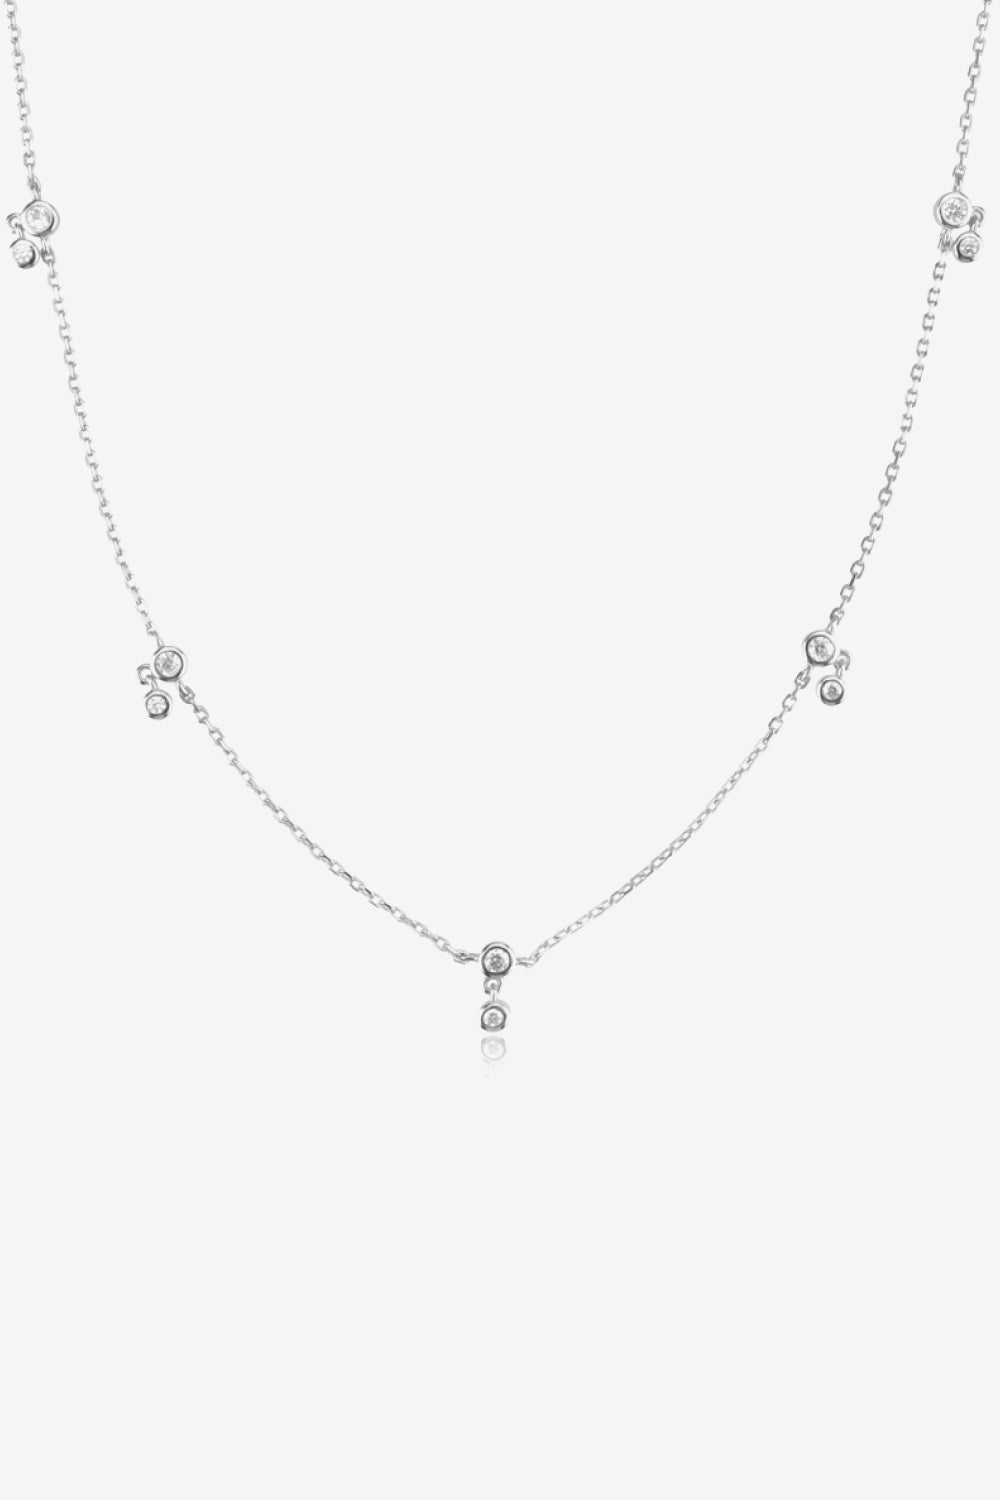 Zircon 925 Sterling Silver Necklace - Necklaces - FITGGINS